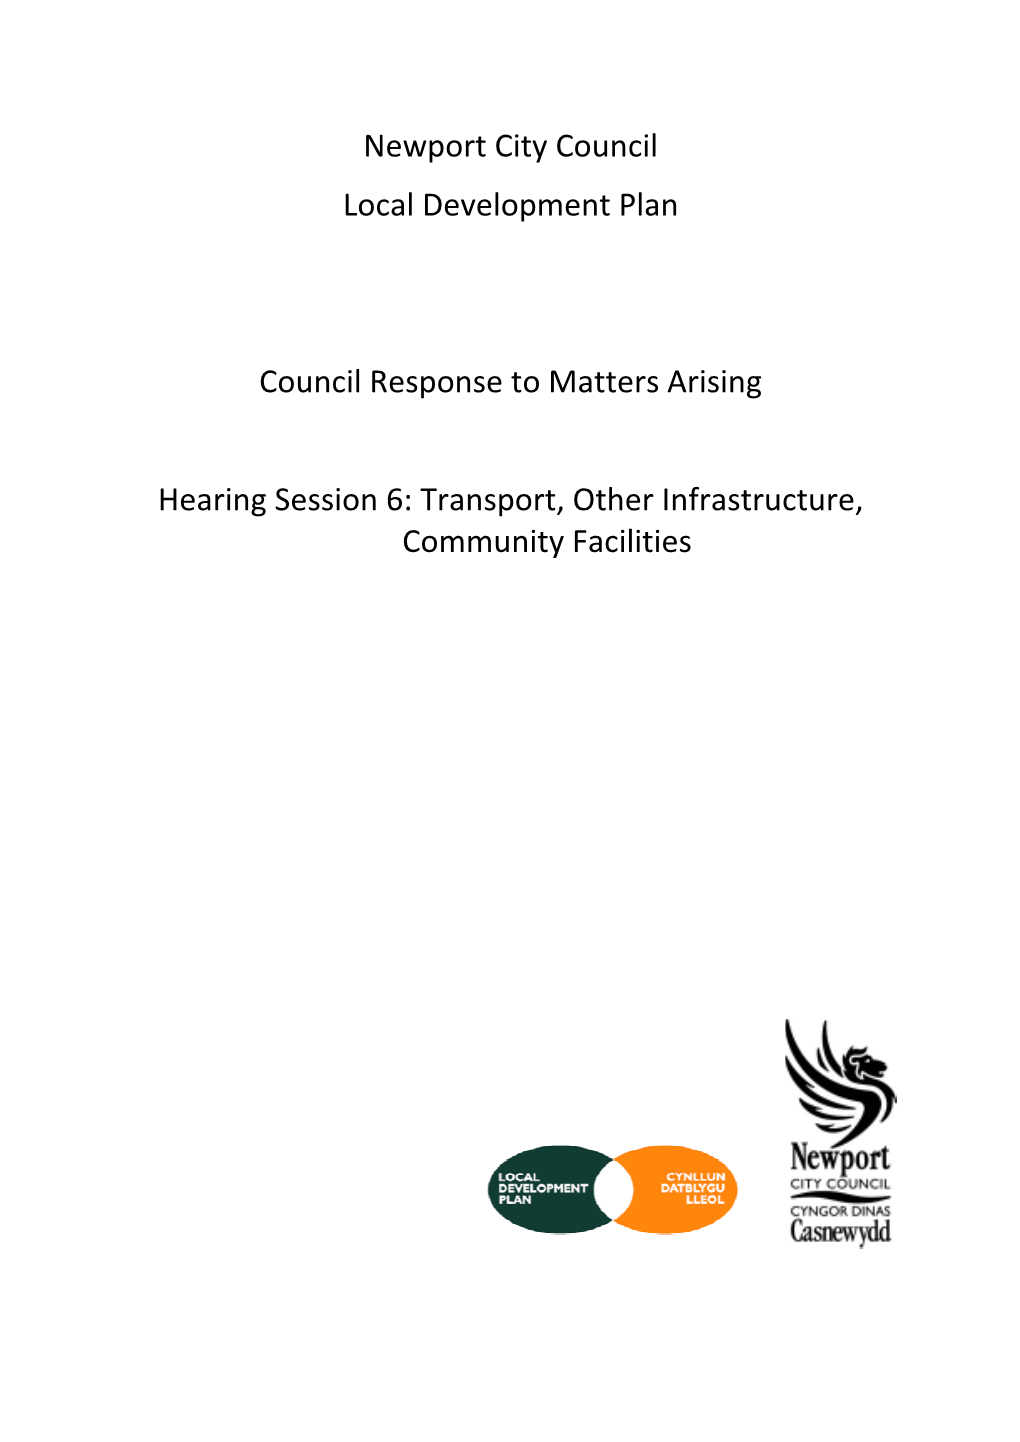 Council's Response to Matters Arising